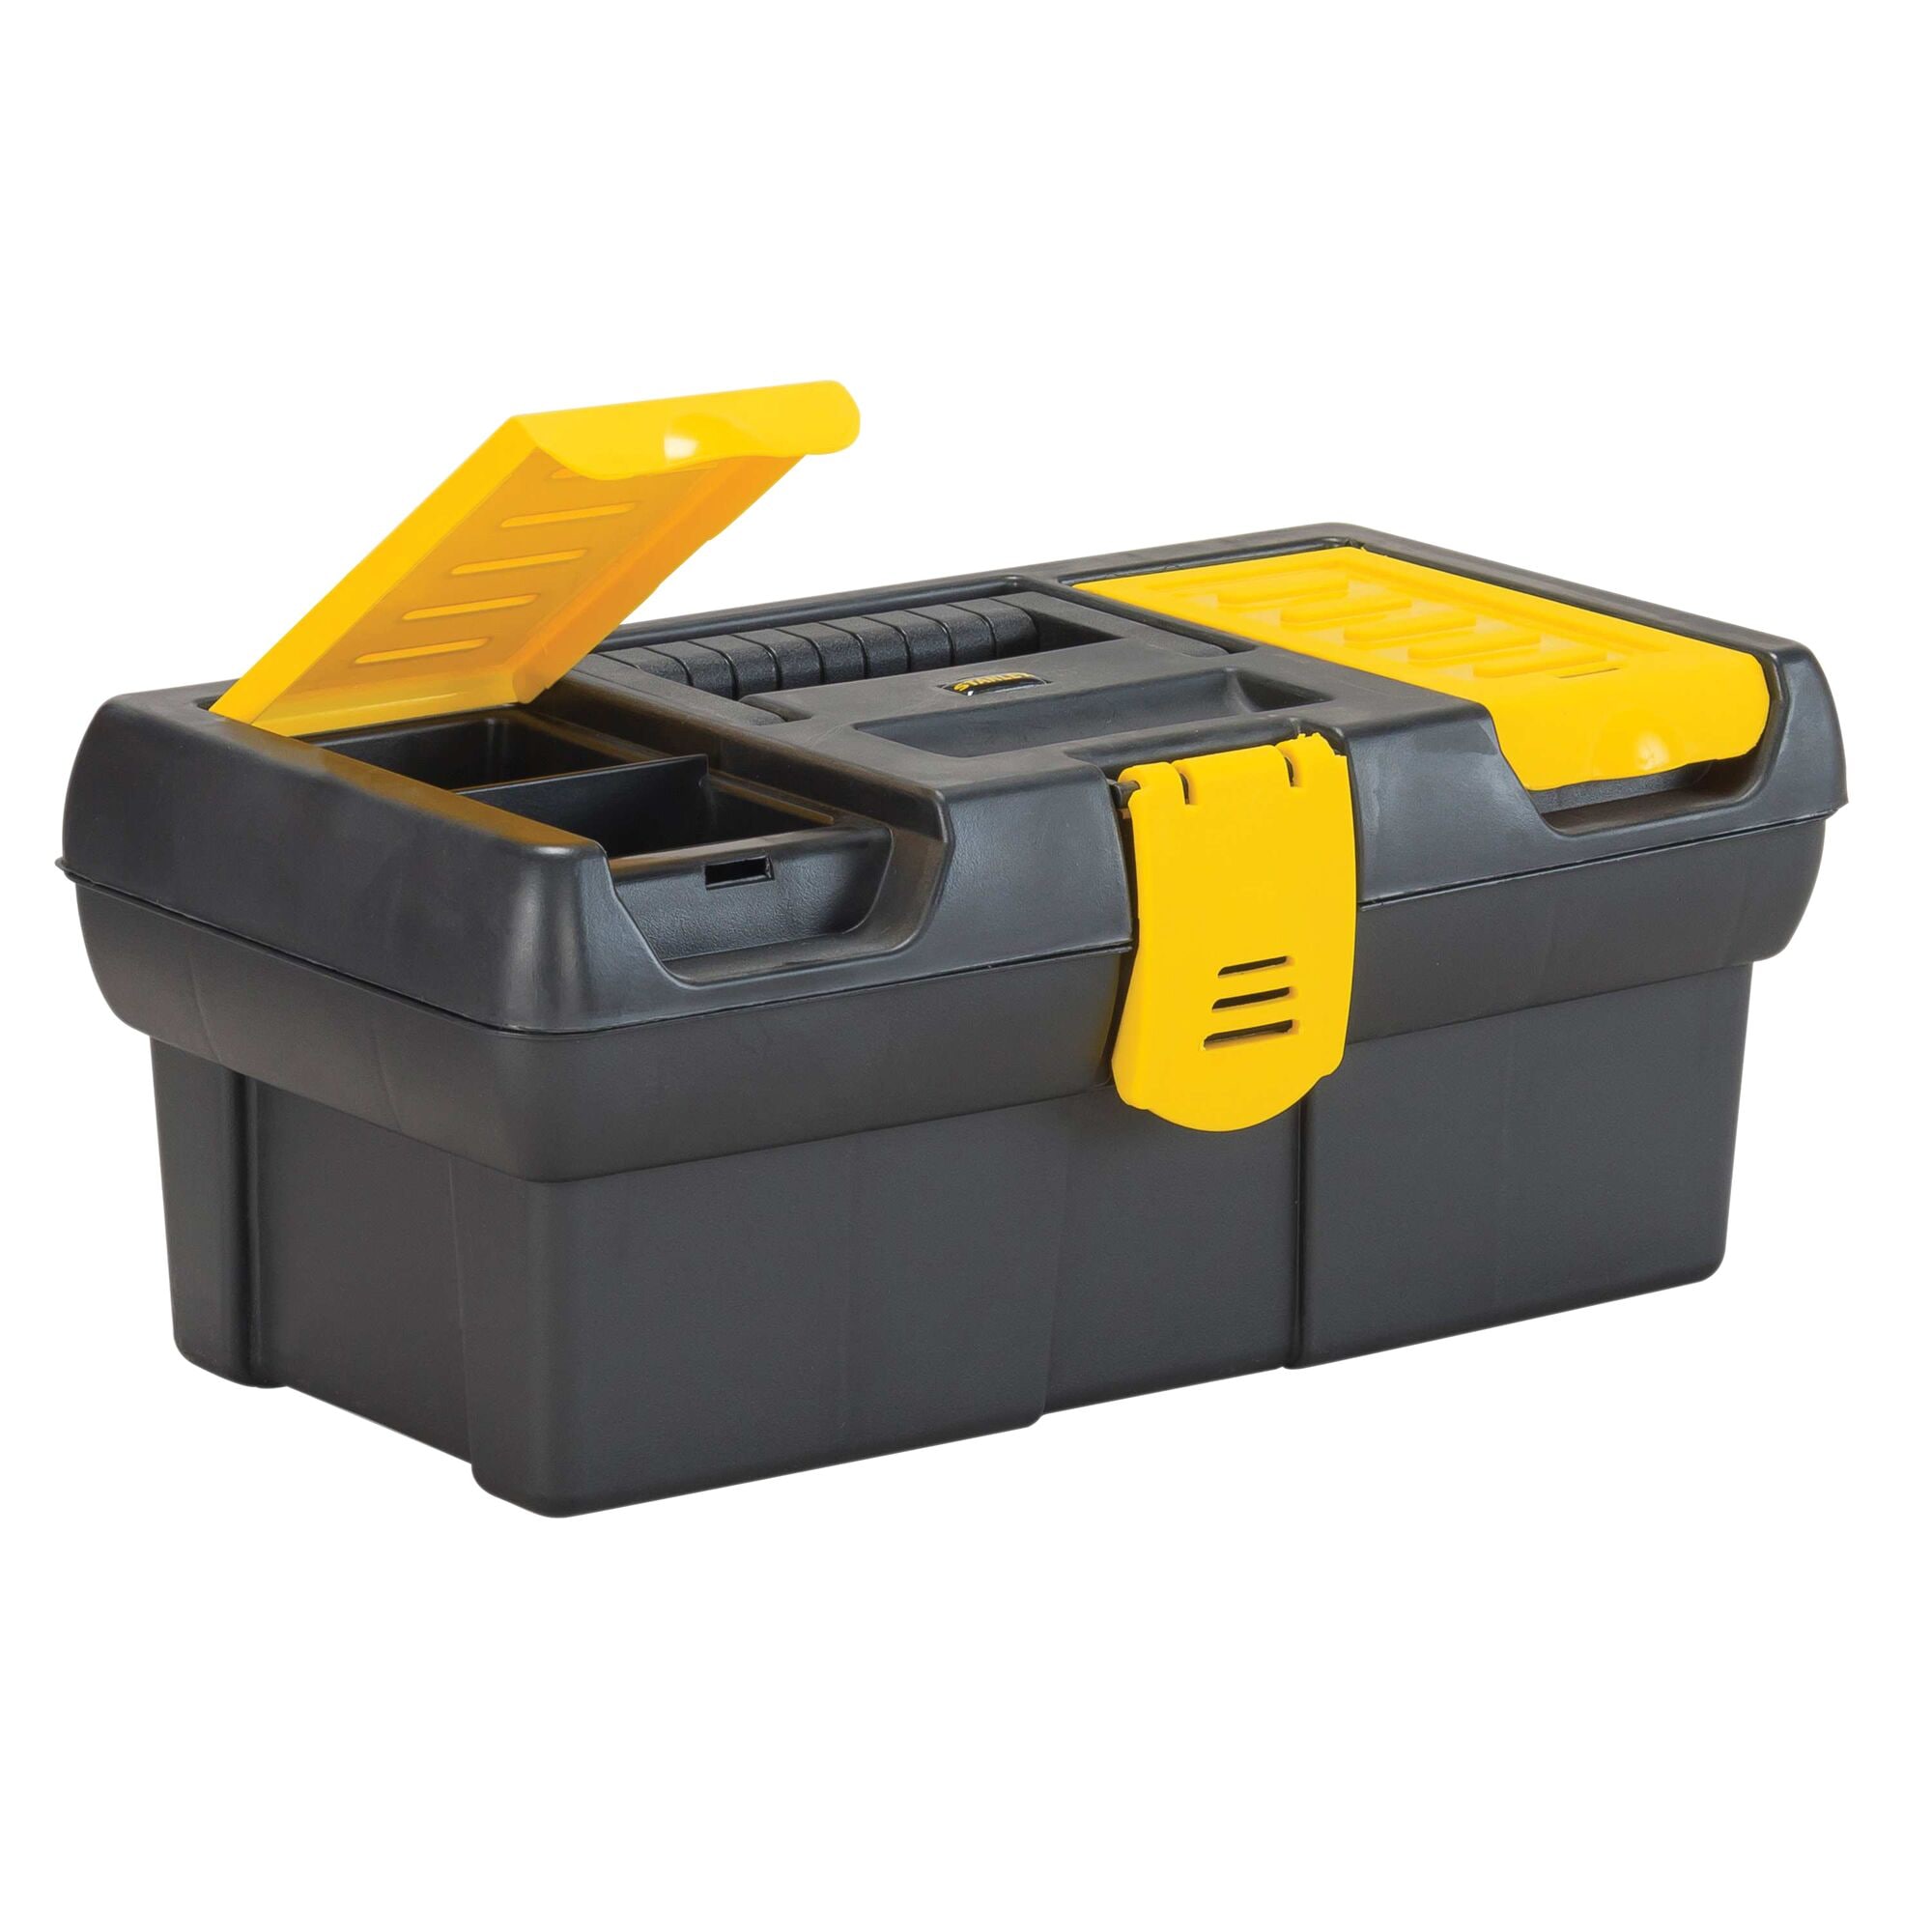 Details about   Tool Box 12-1/2 in Lid Organizers Portable Storage Container Tray Plastic Small 